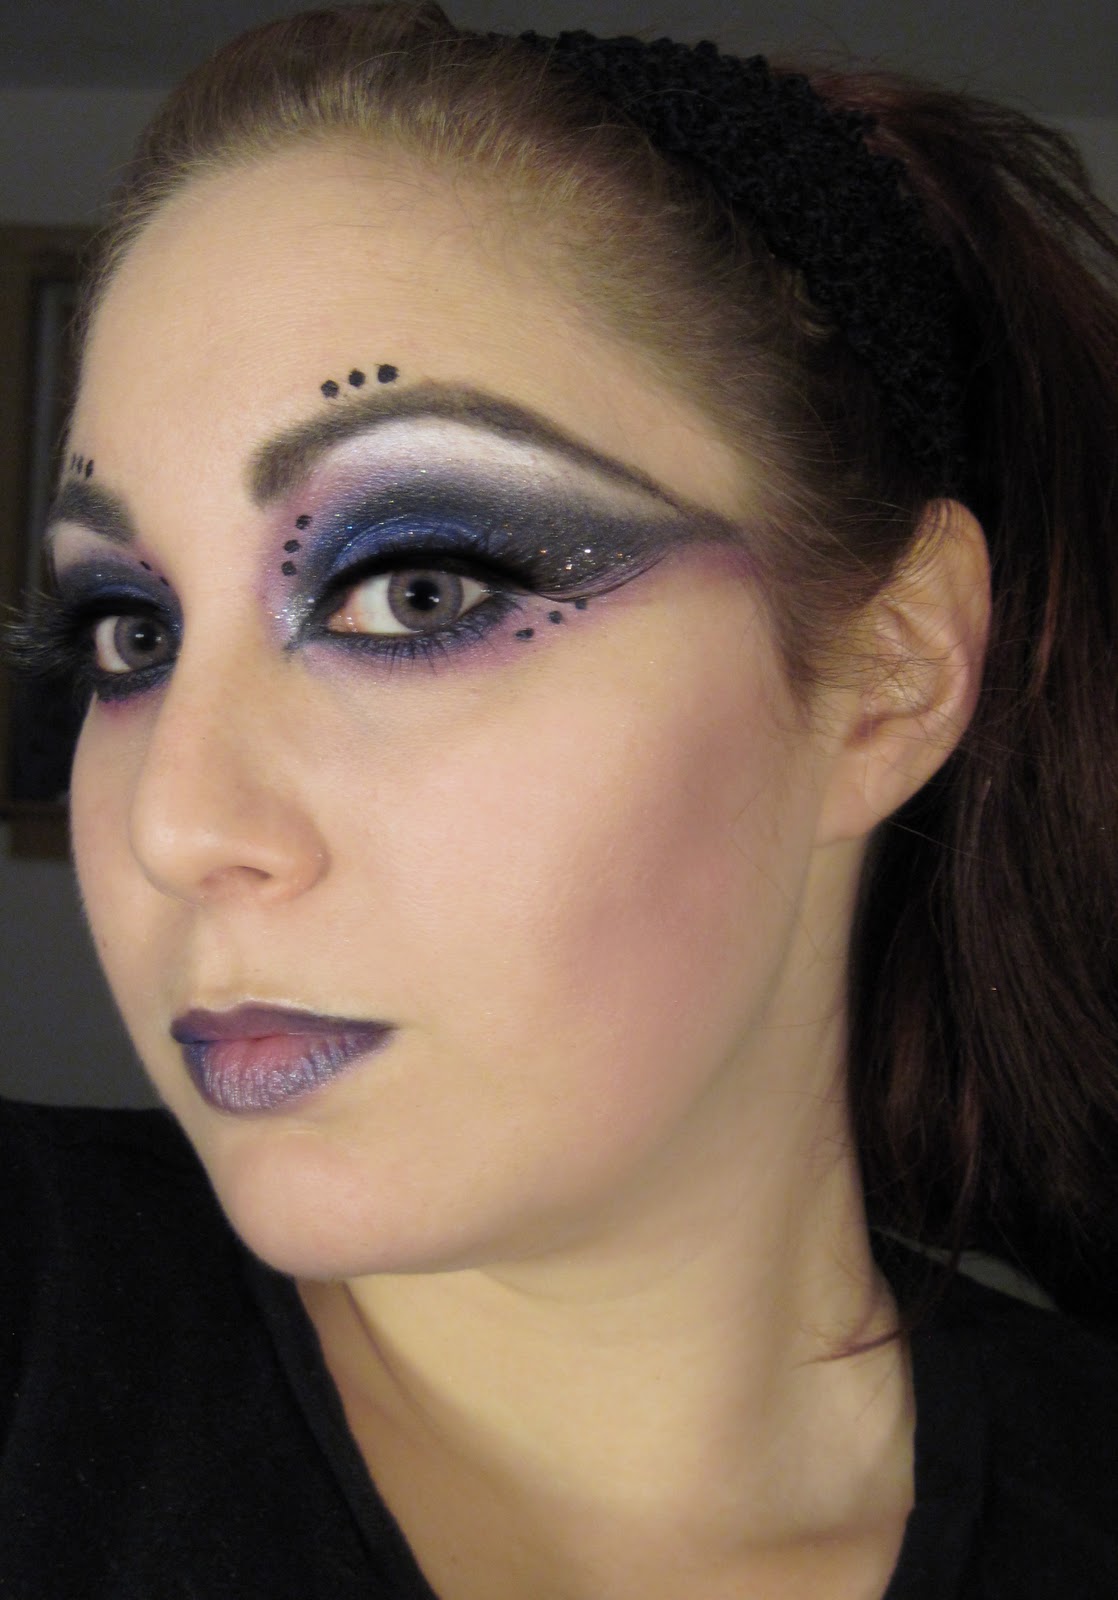 The Eyes Have It: Get the Look - Bewitching Eyes for Halloween